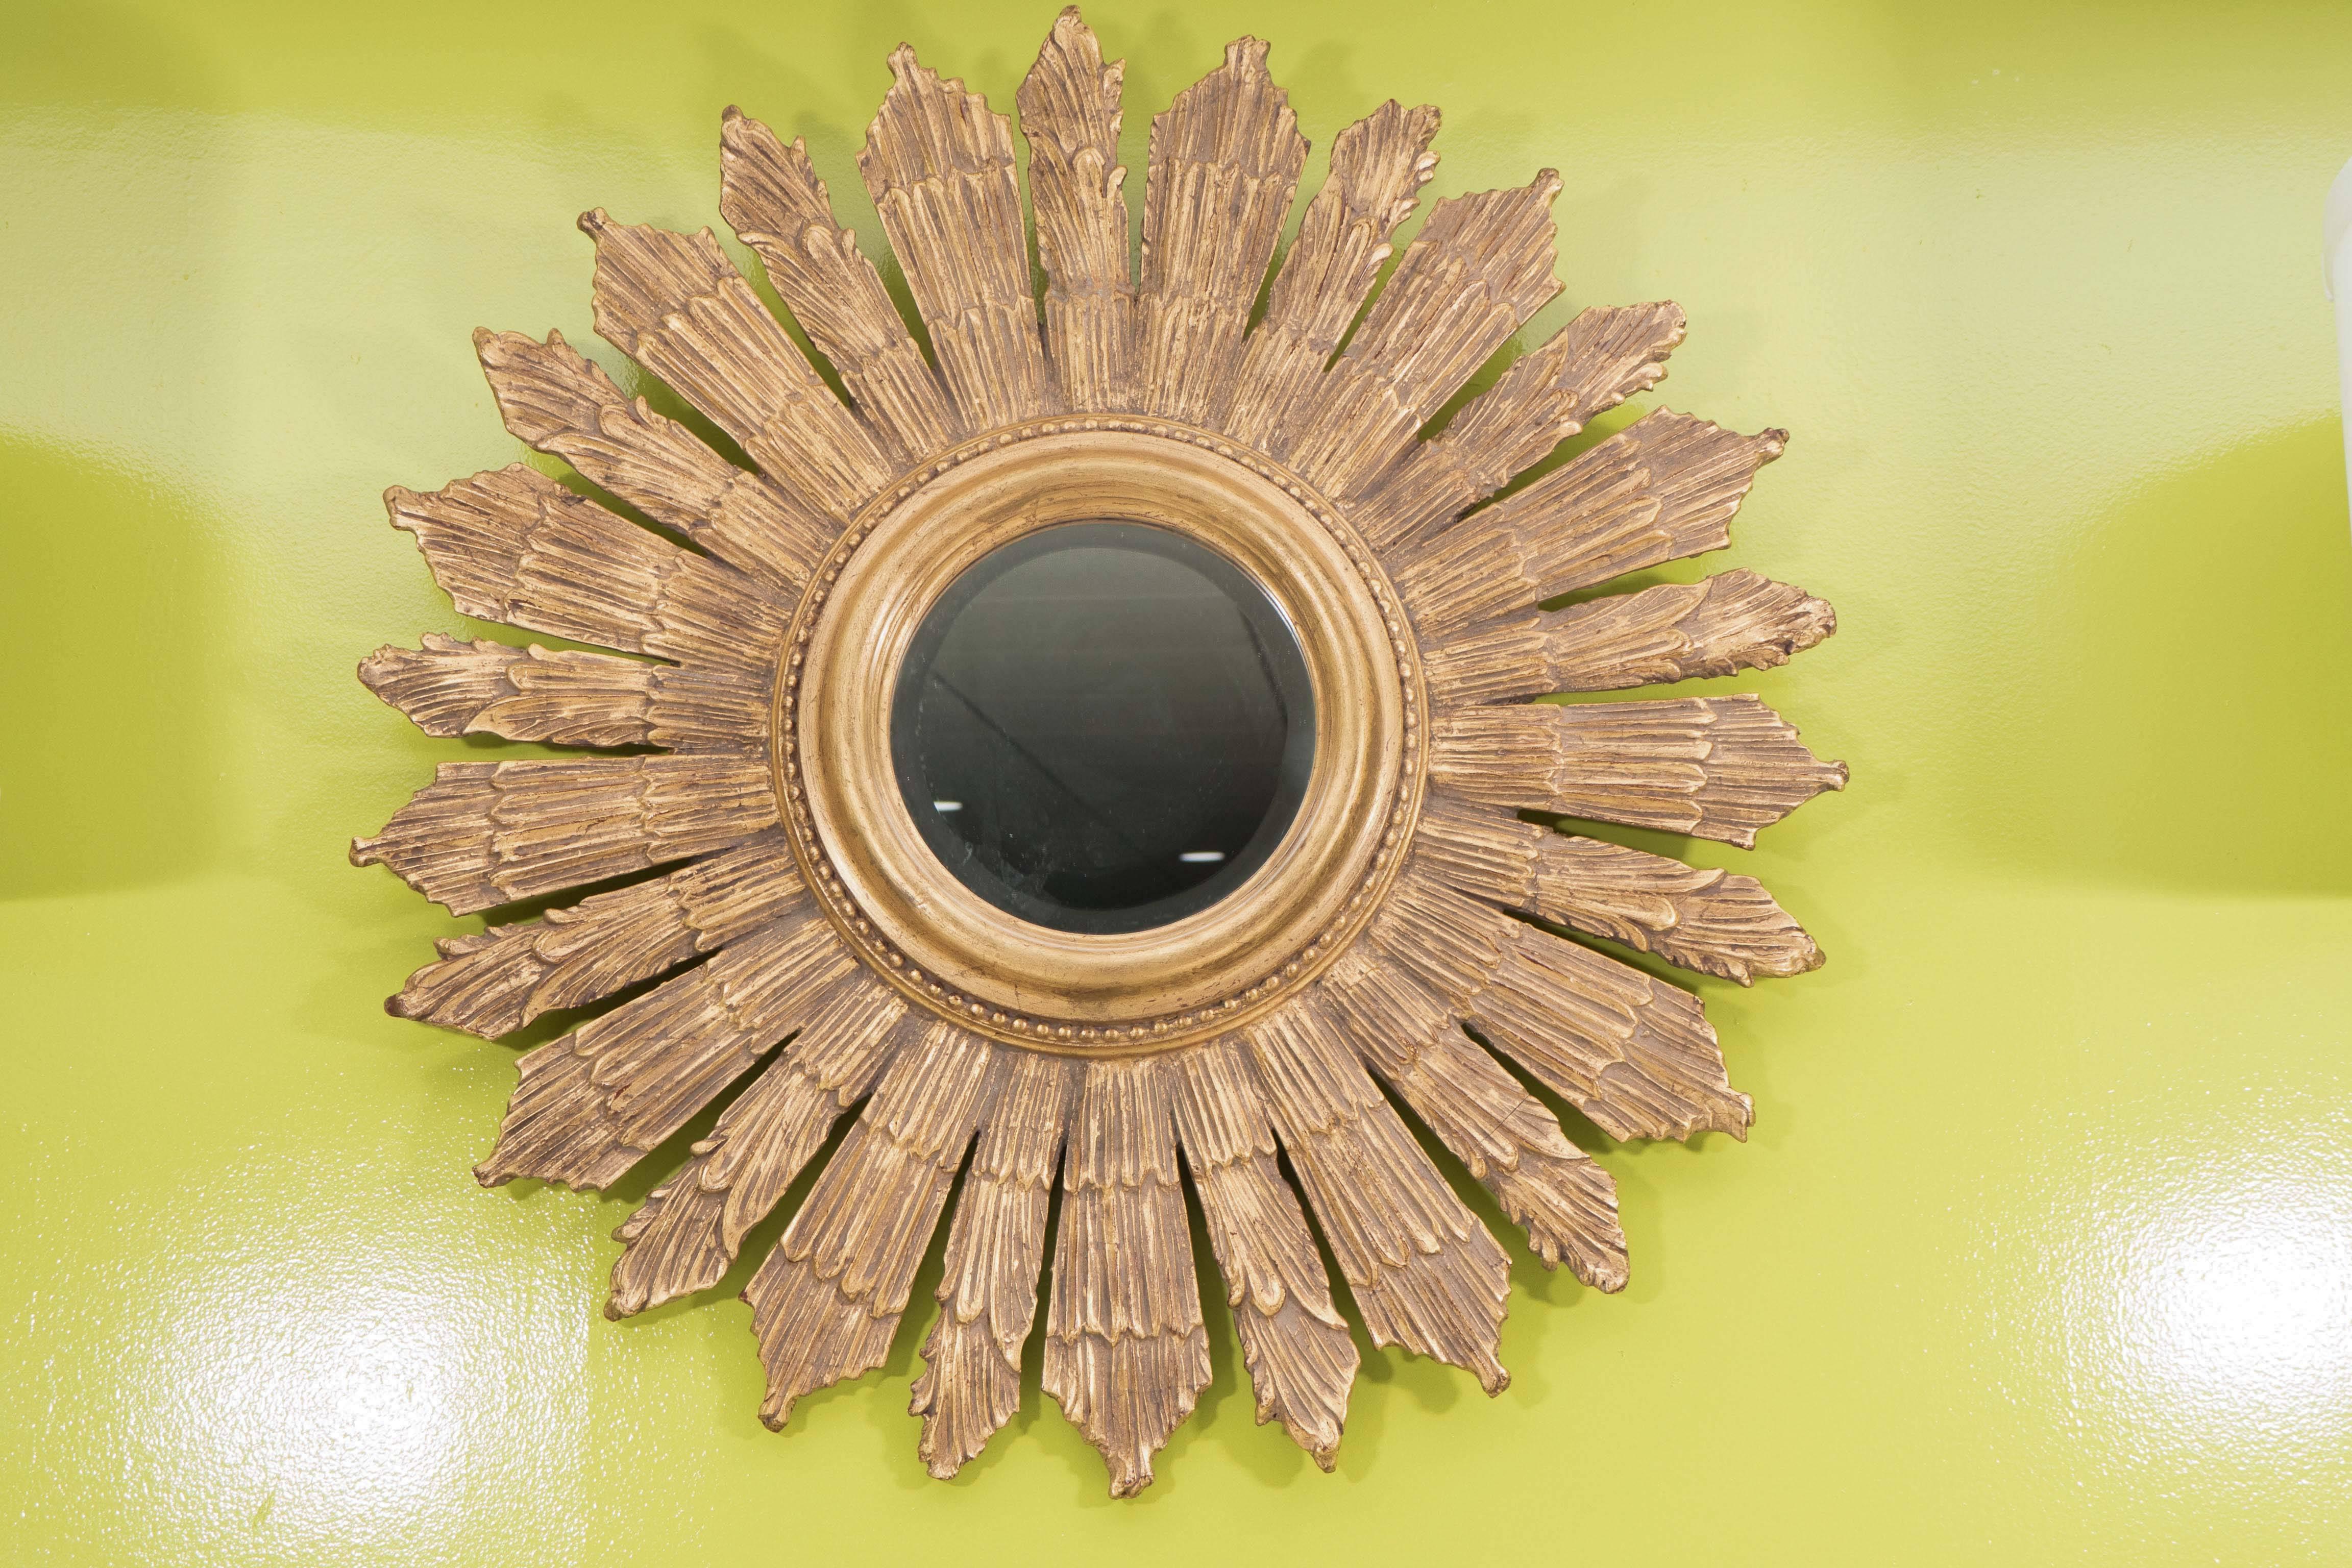 A nice looking French gold sunburst mirror with a molded, center ring framed in in beading and surrounding beveled glass. Fabricated in resin, this piece is solid and sturdy, ready to hang.